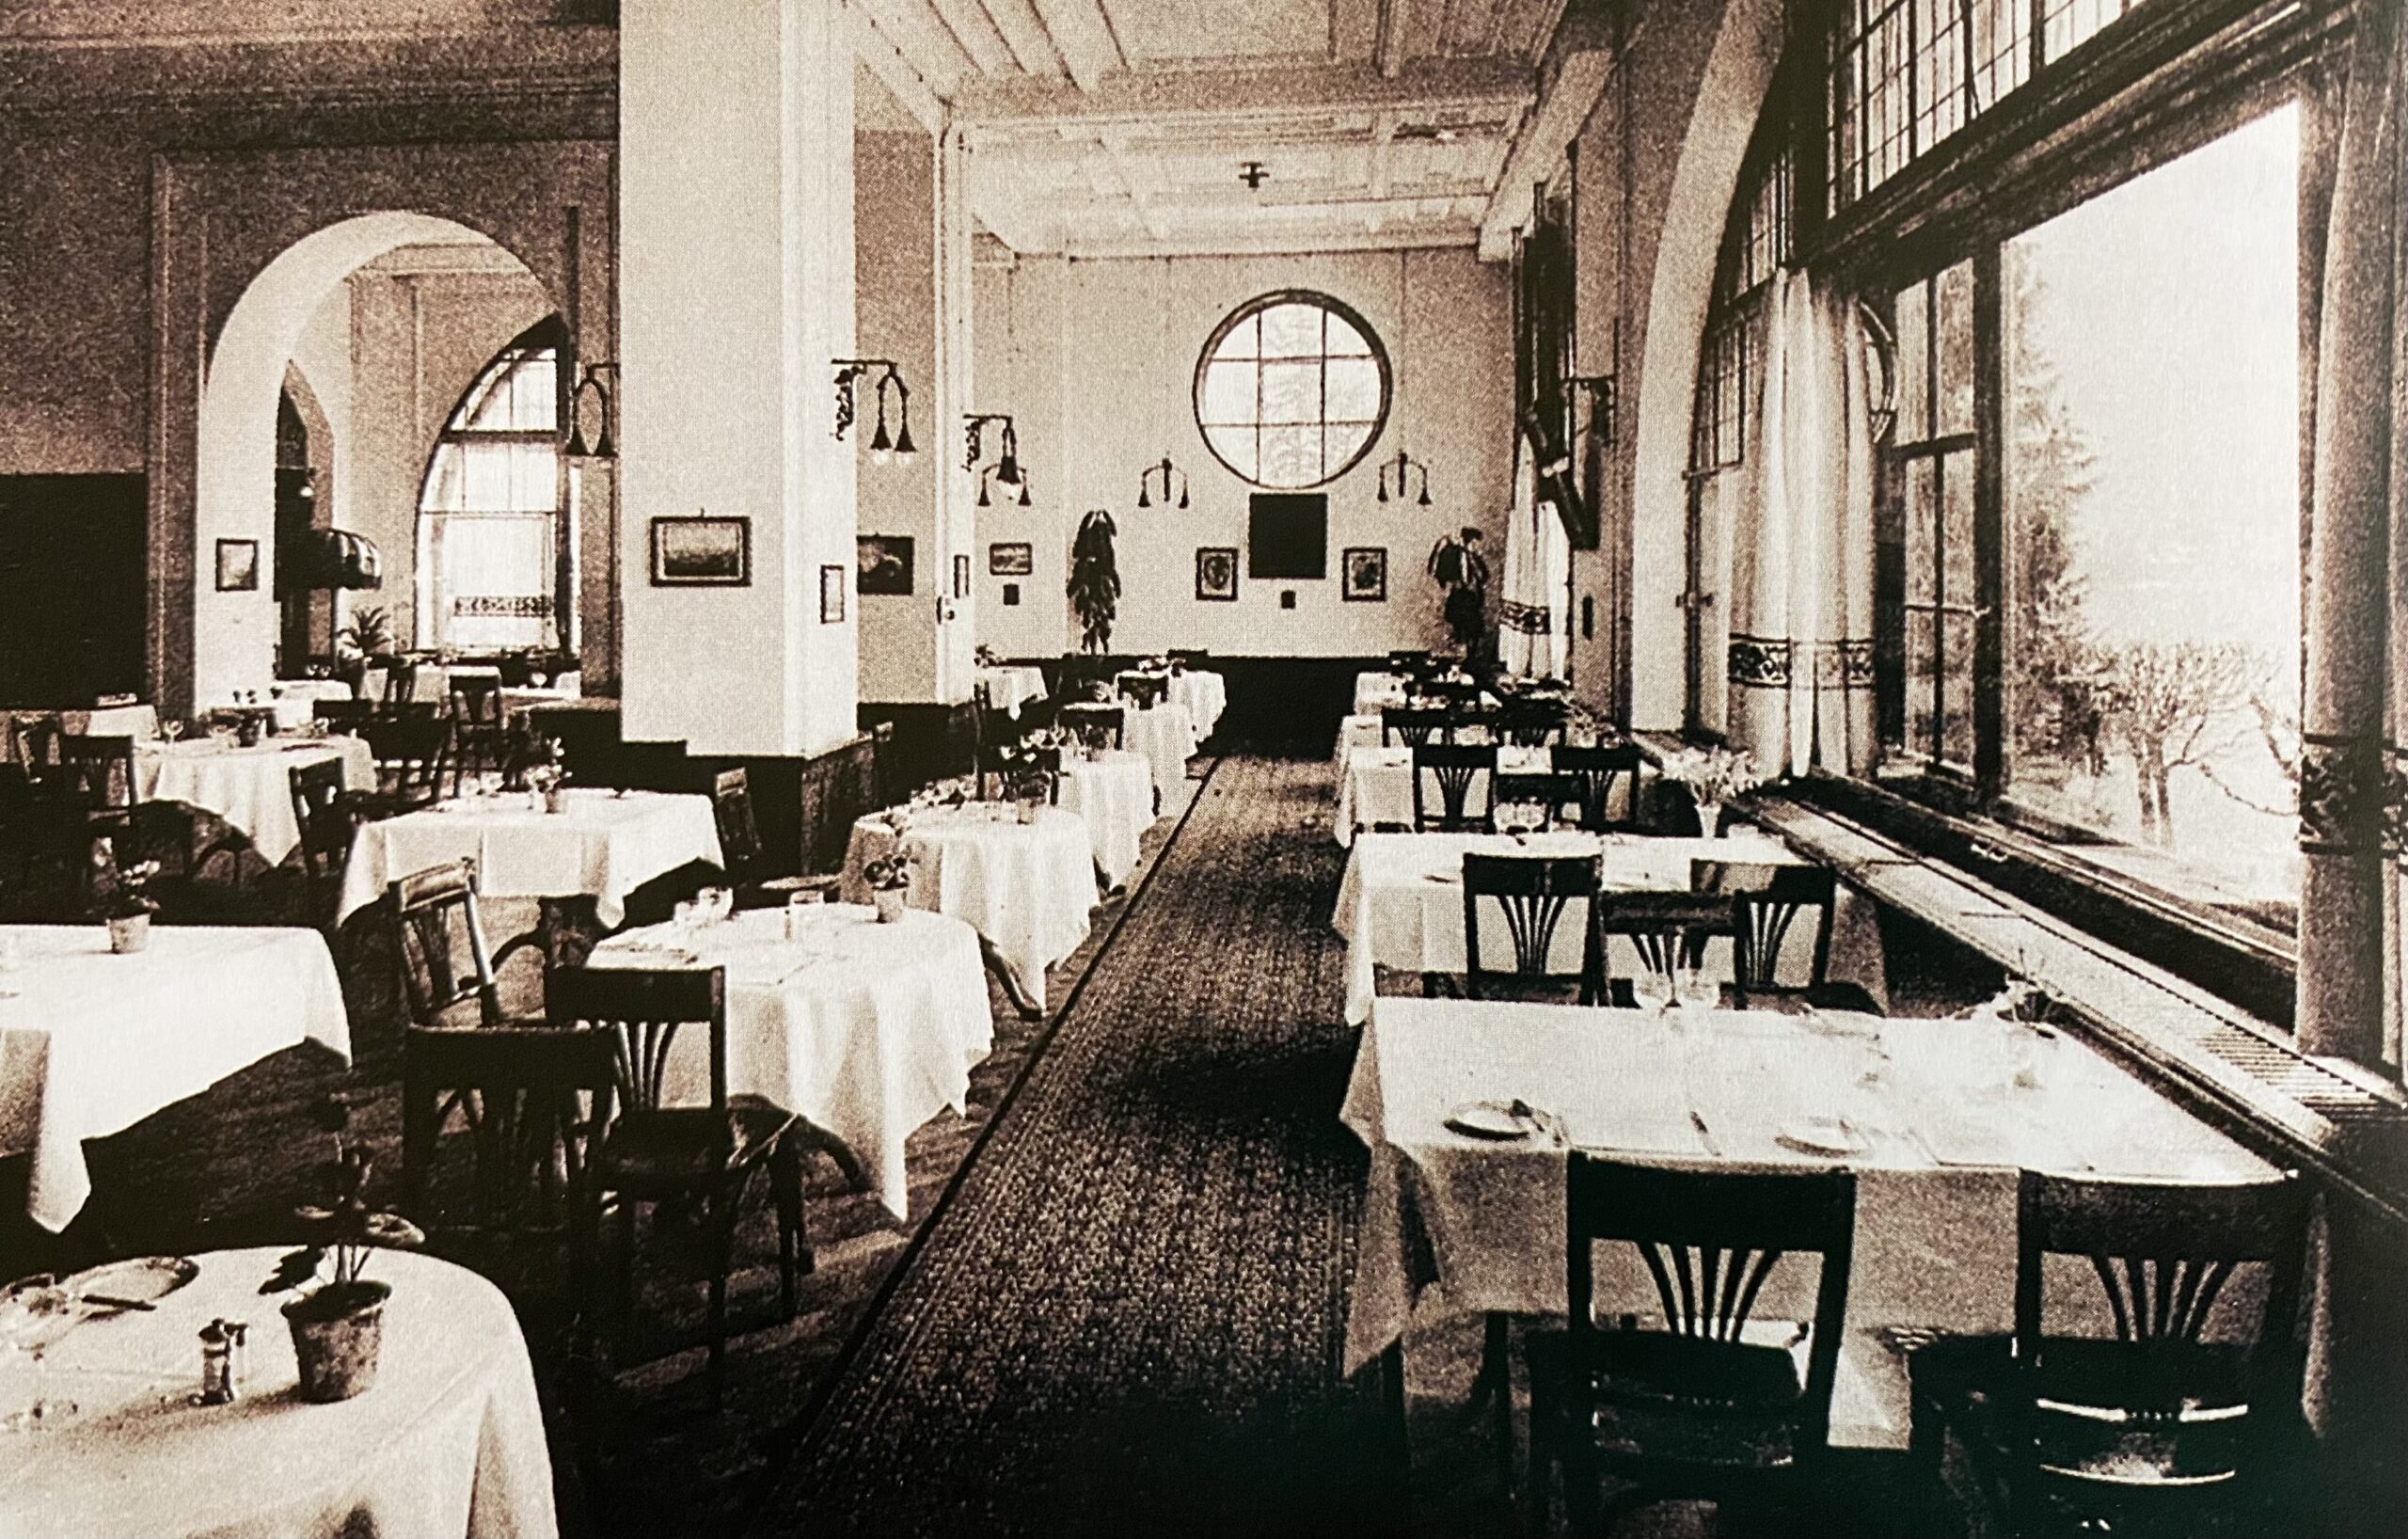 1930s dining hall at the Park Hotel